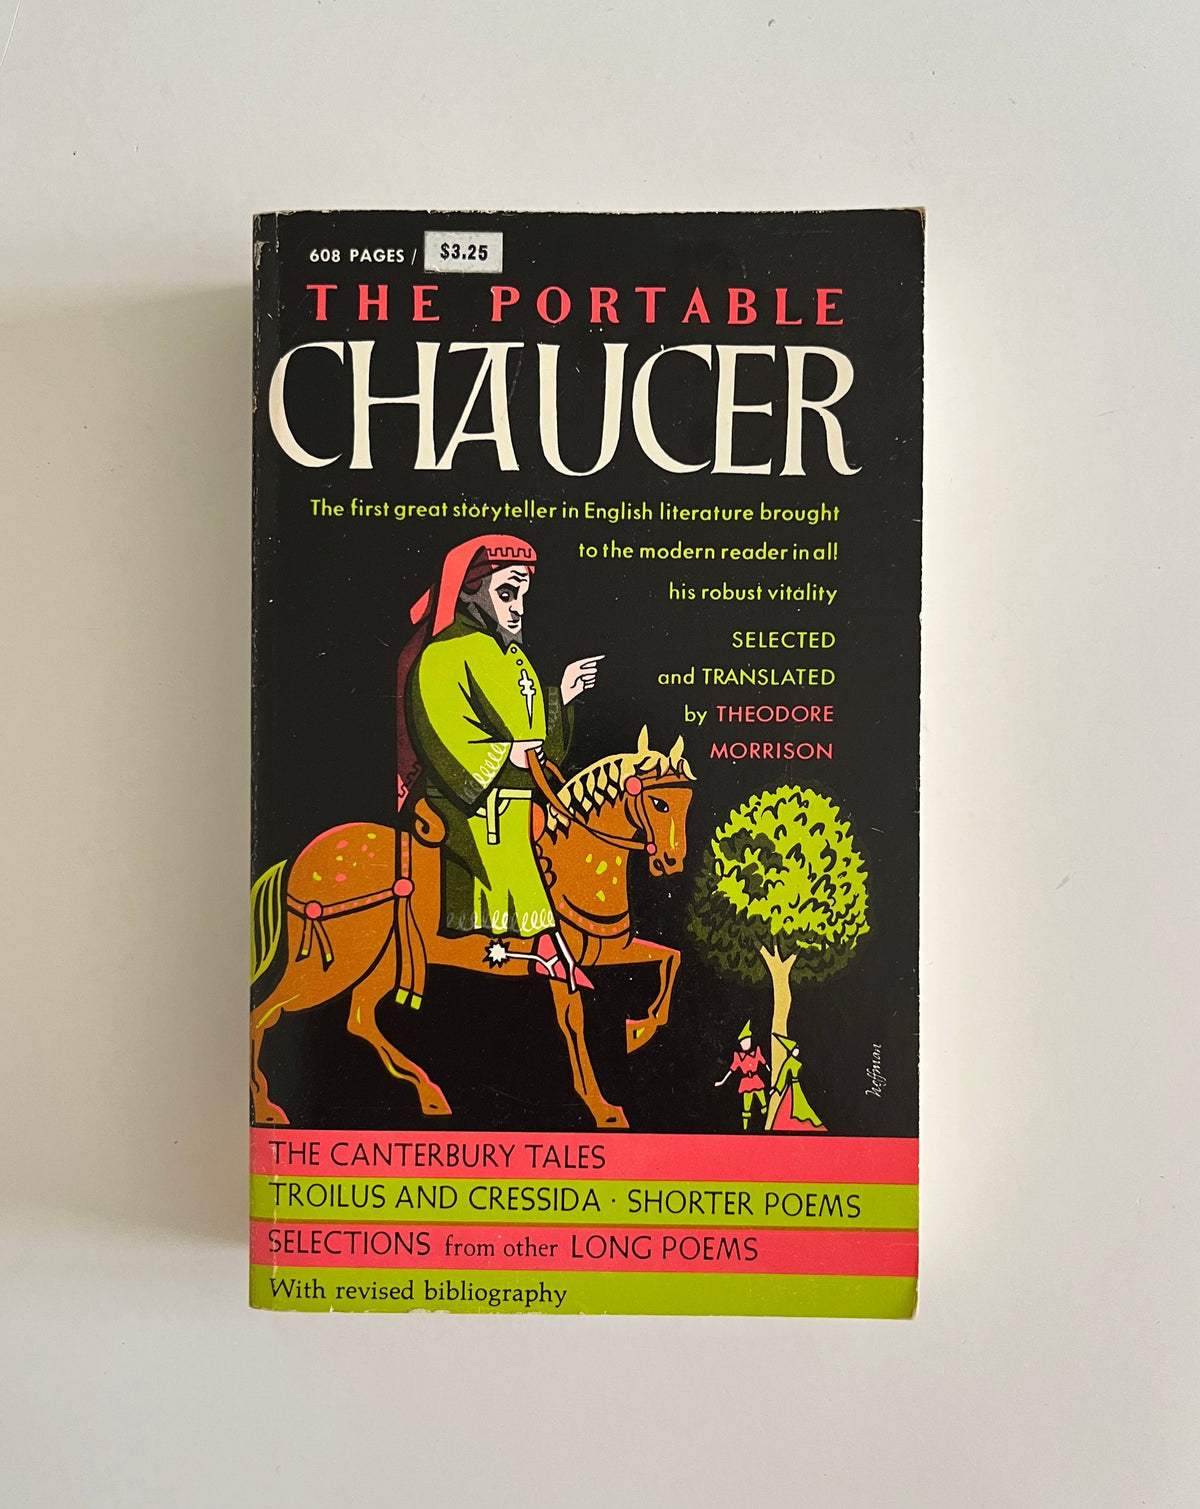 The Portable Chaucer